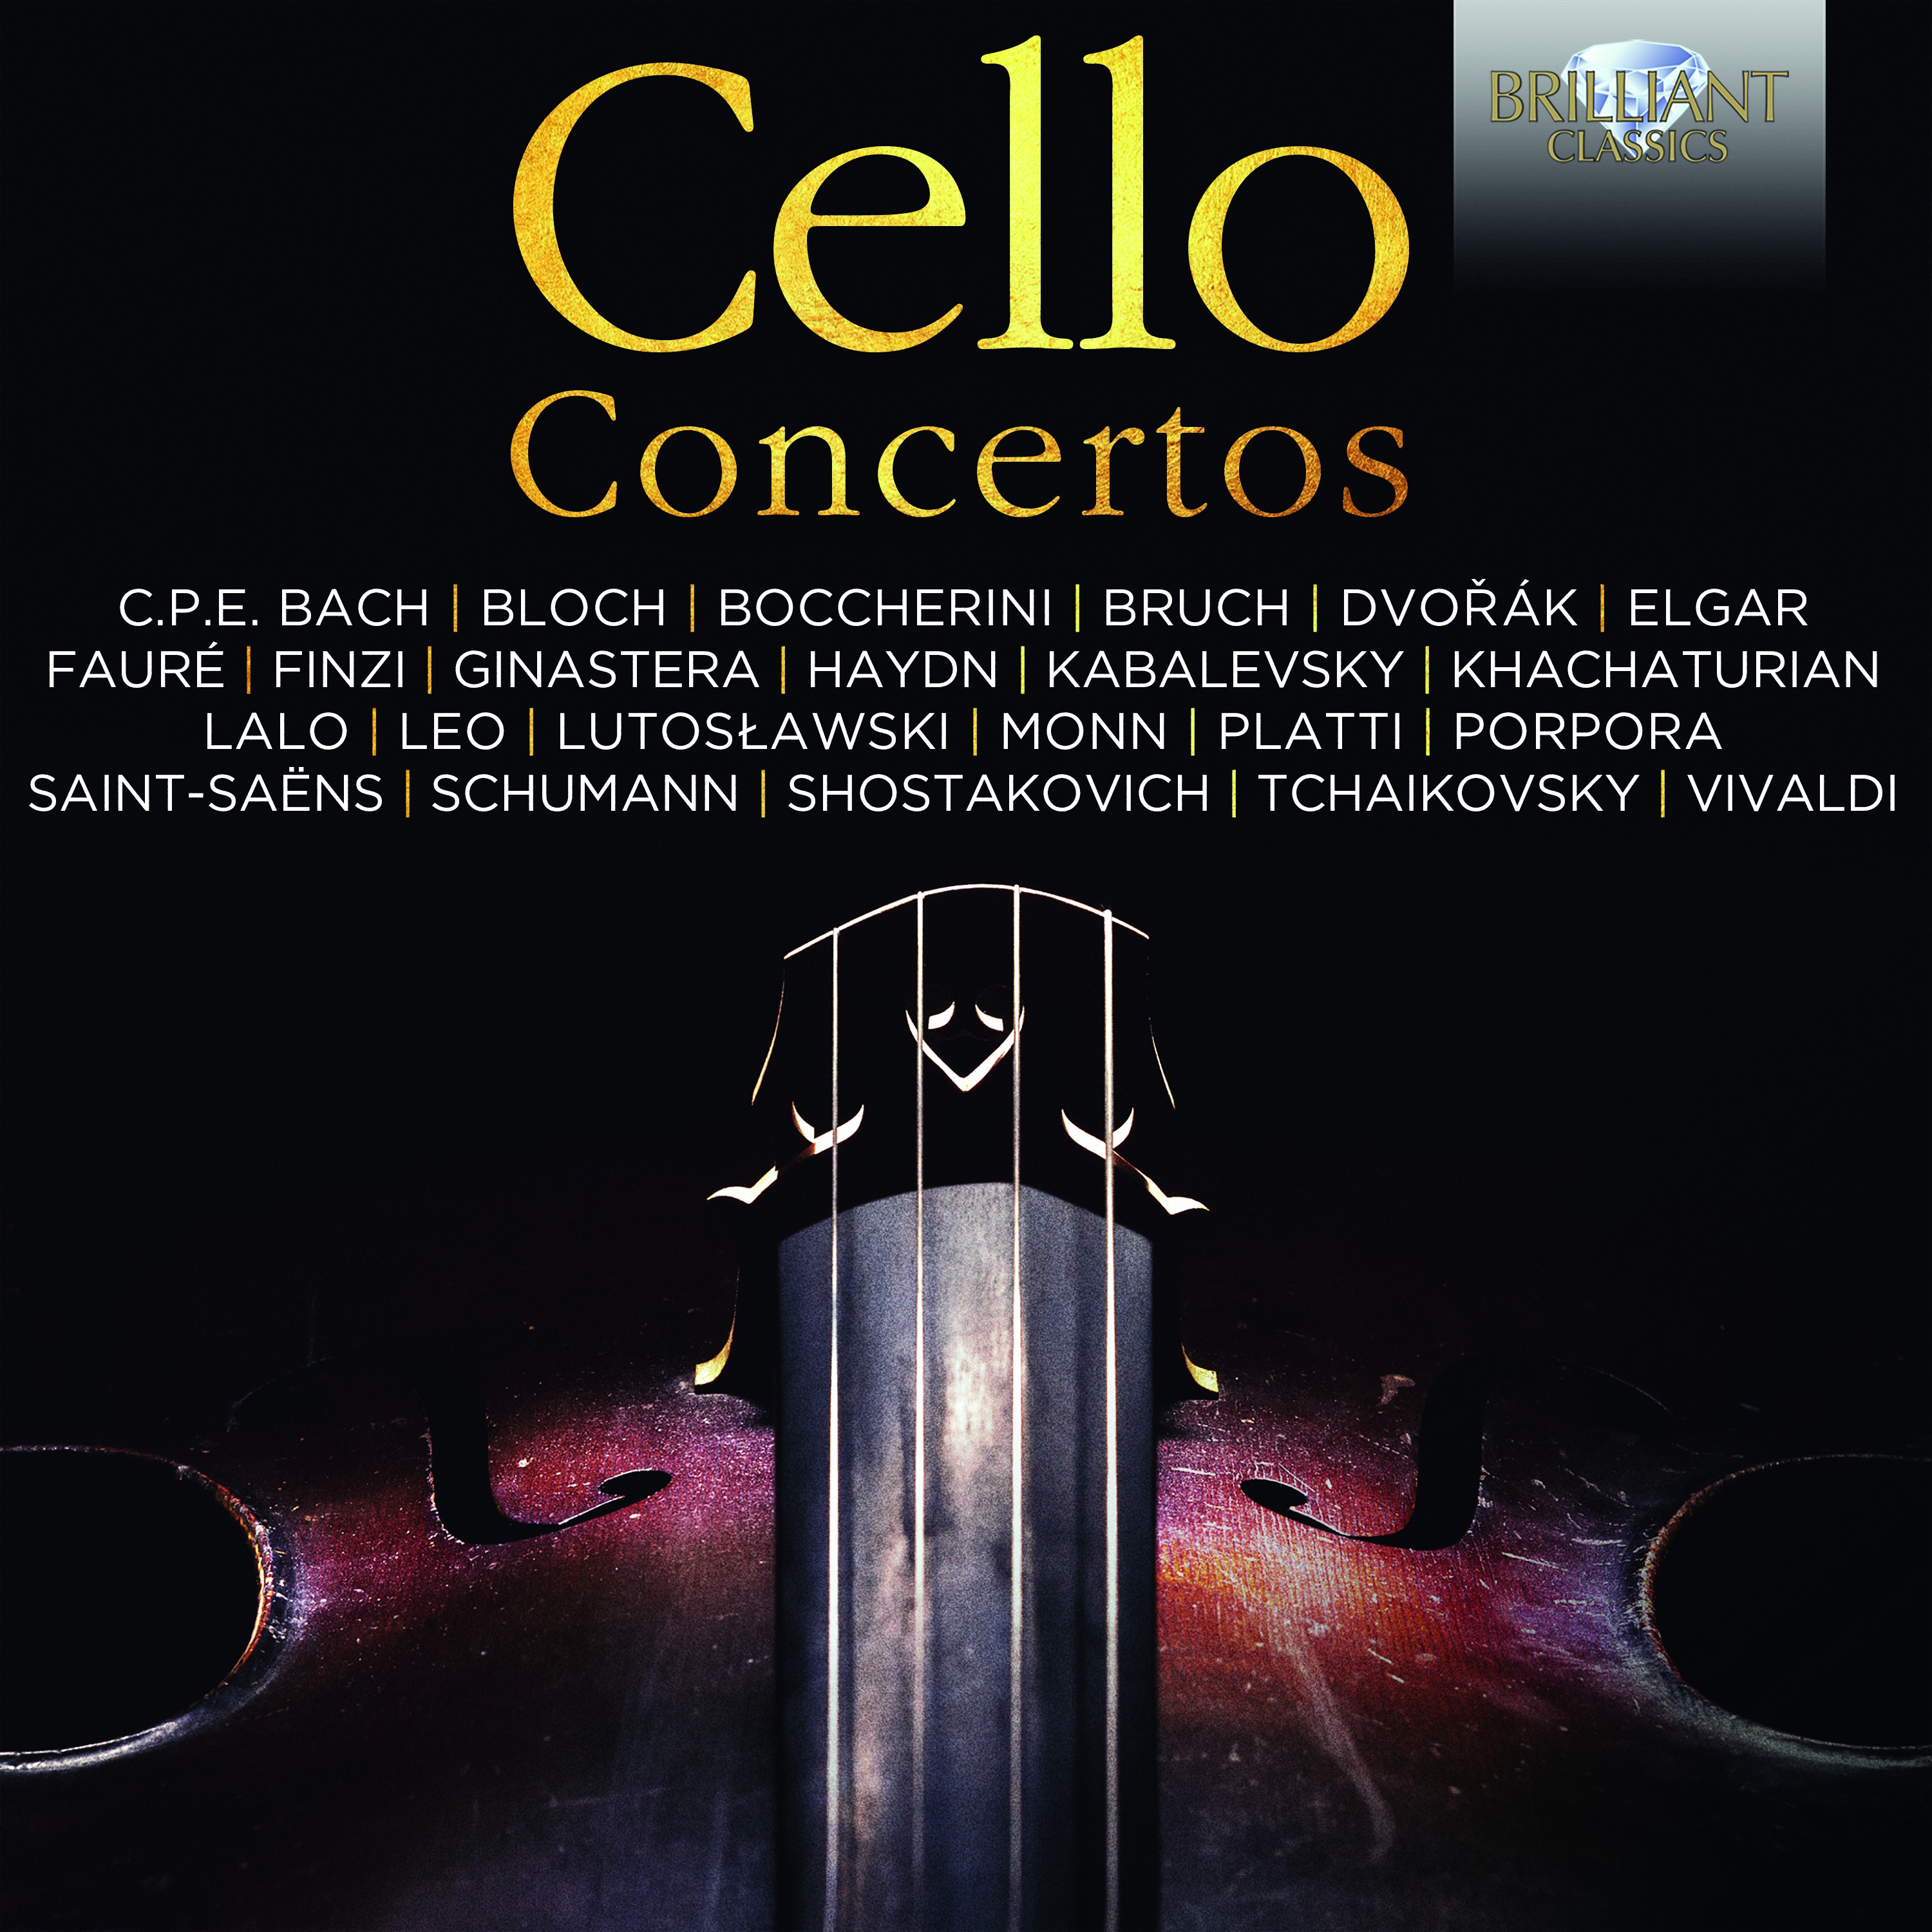 Concerto grosso in D Major, D-WD 538, After Sonata, Op. 5 No. 1 by Corelli: V. Allegro